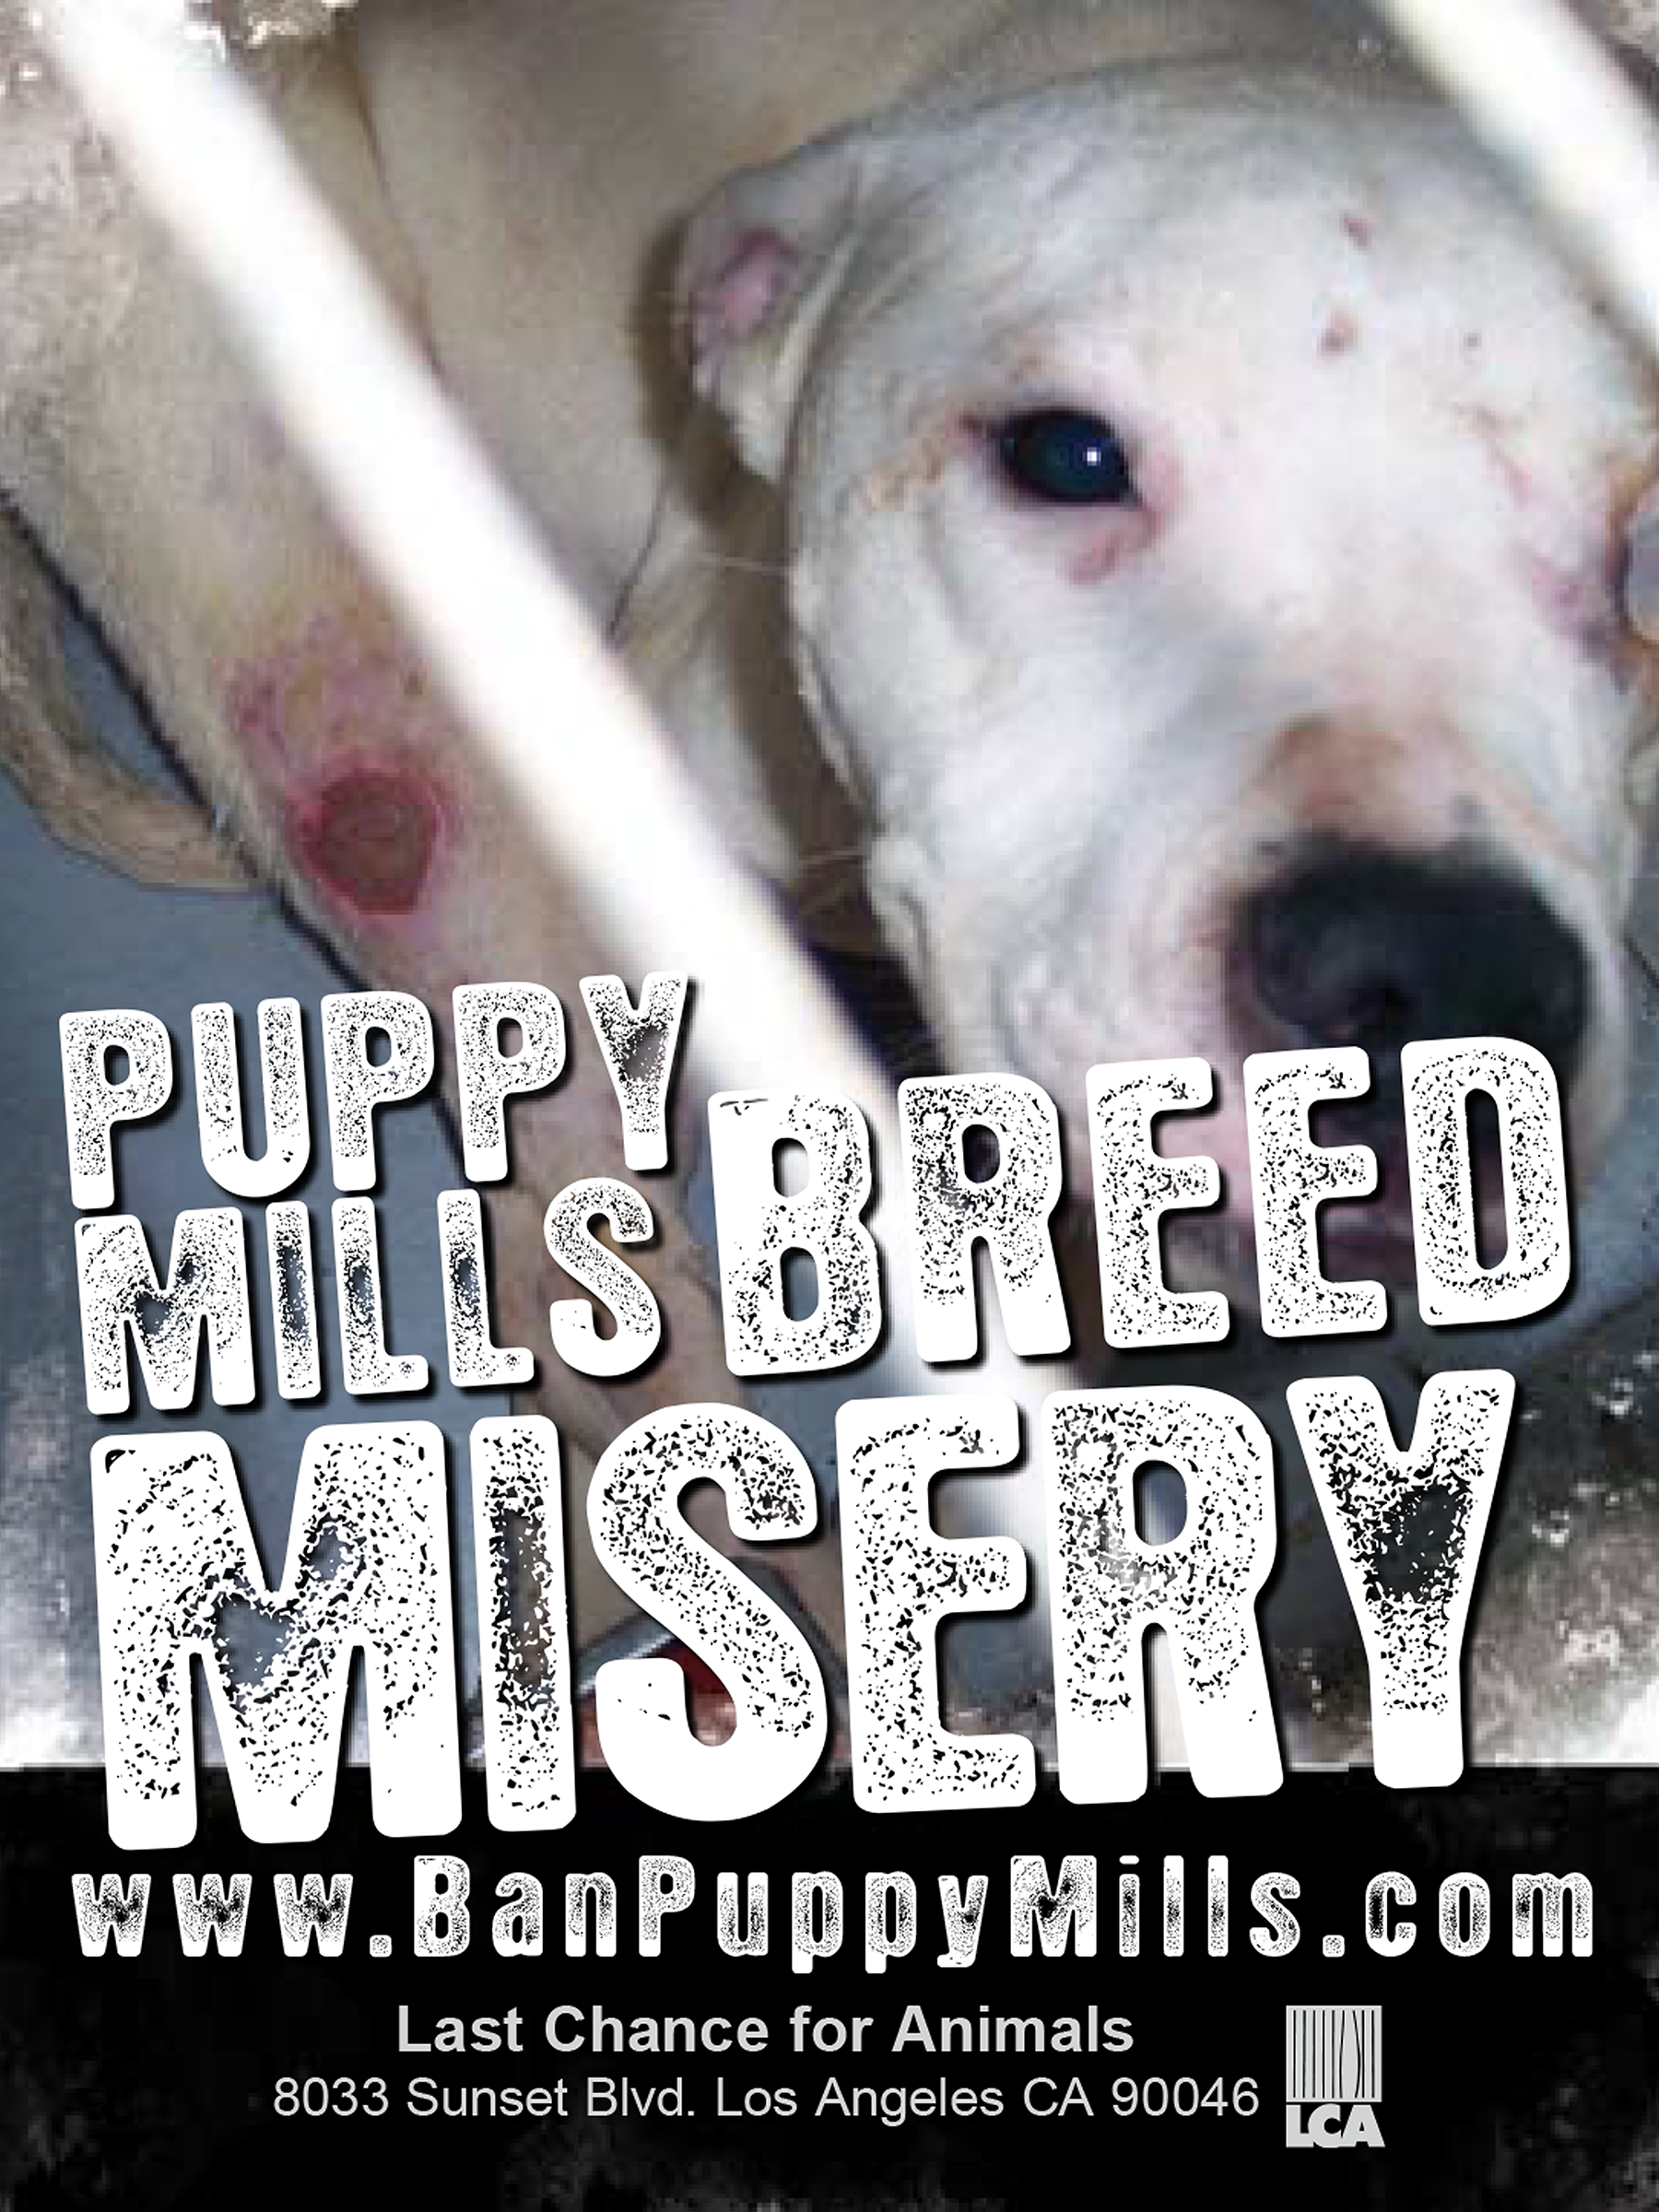 puppy mills breed misery